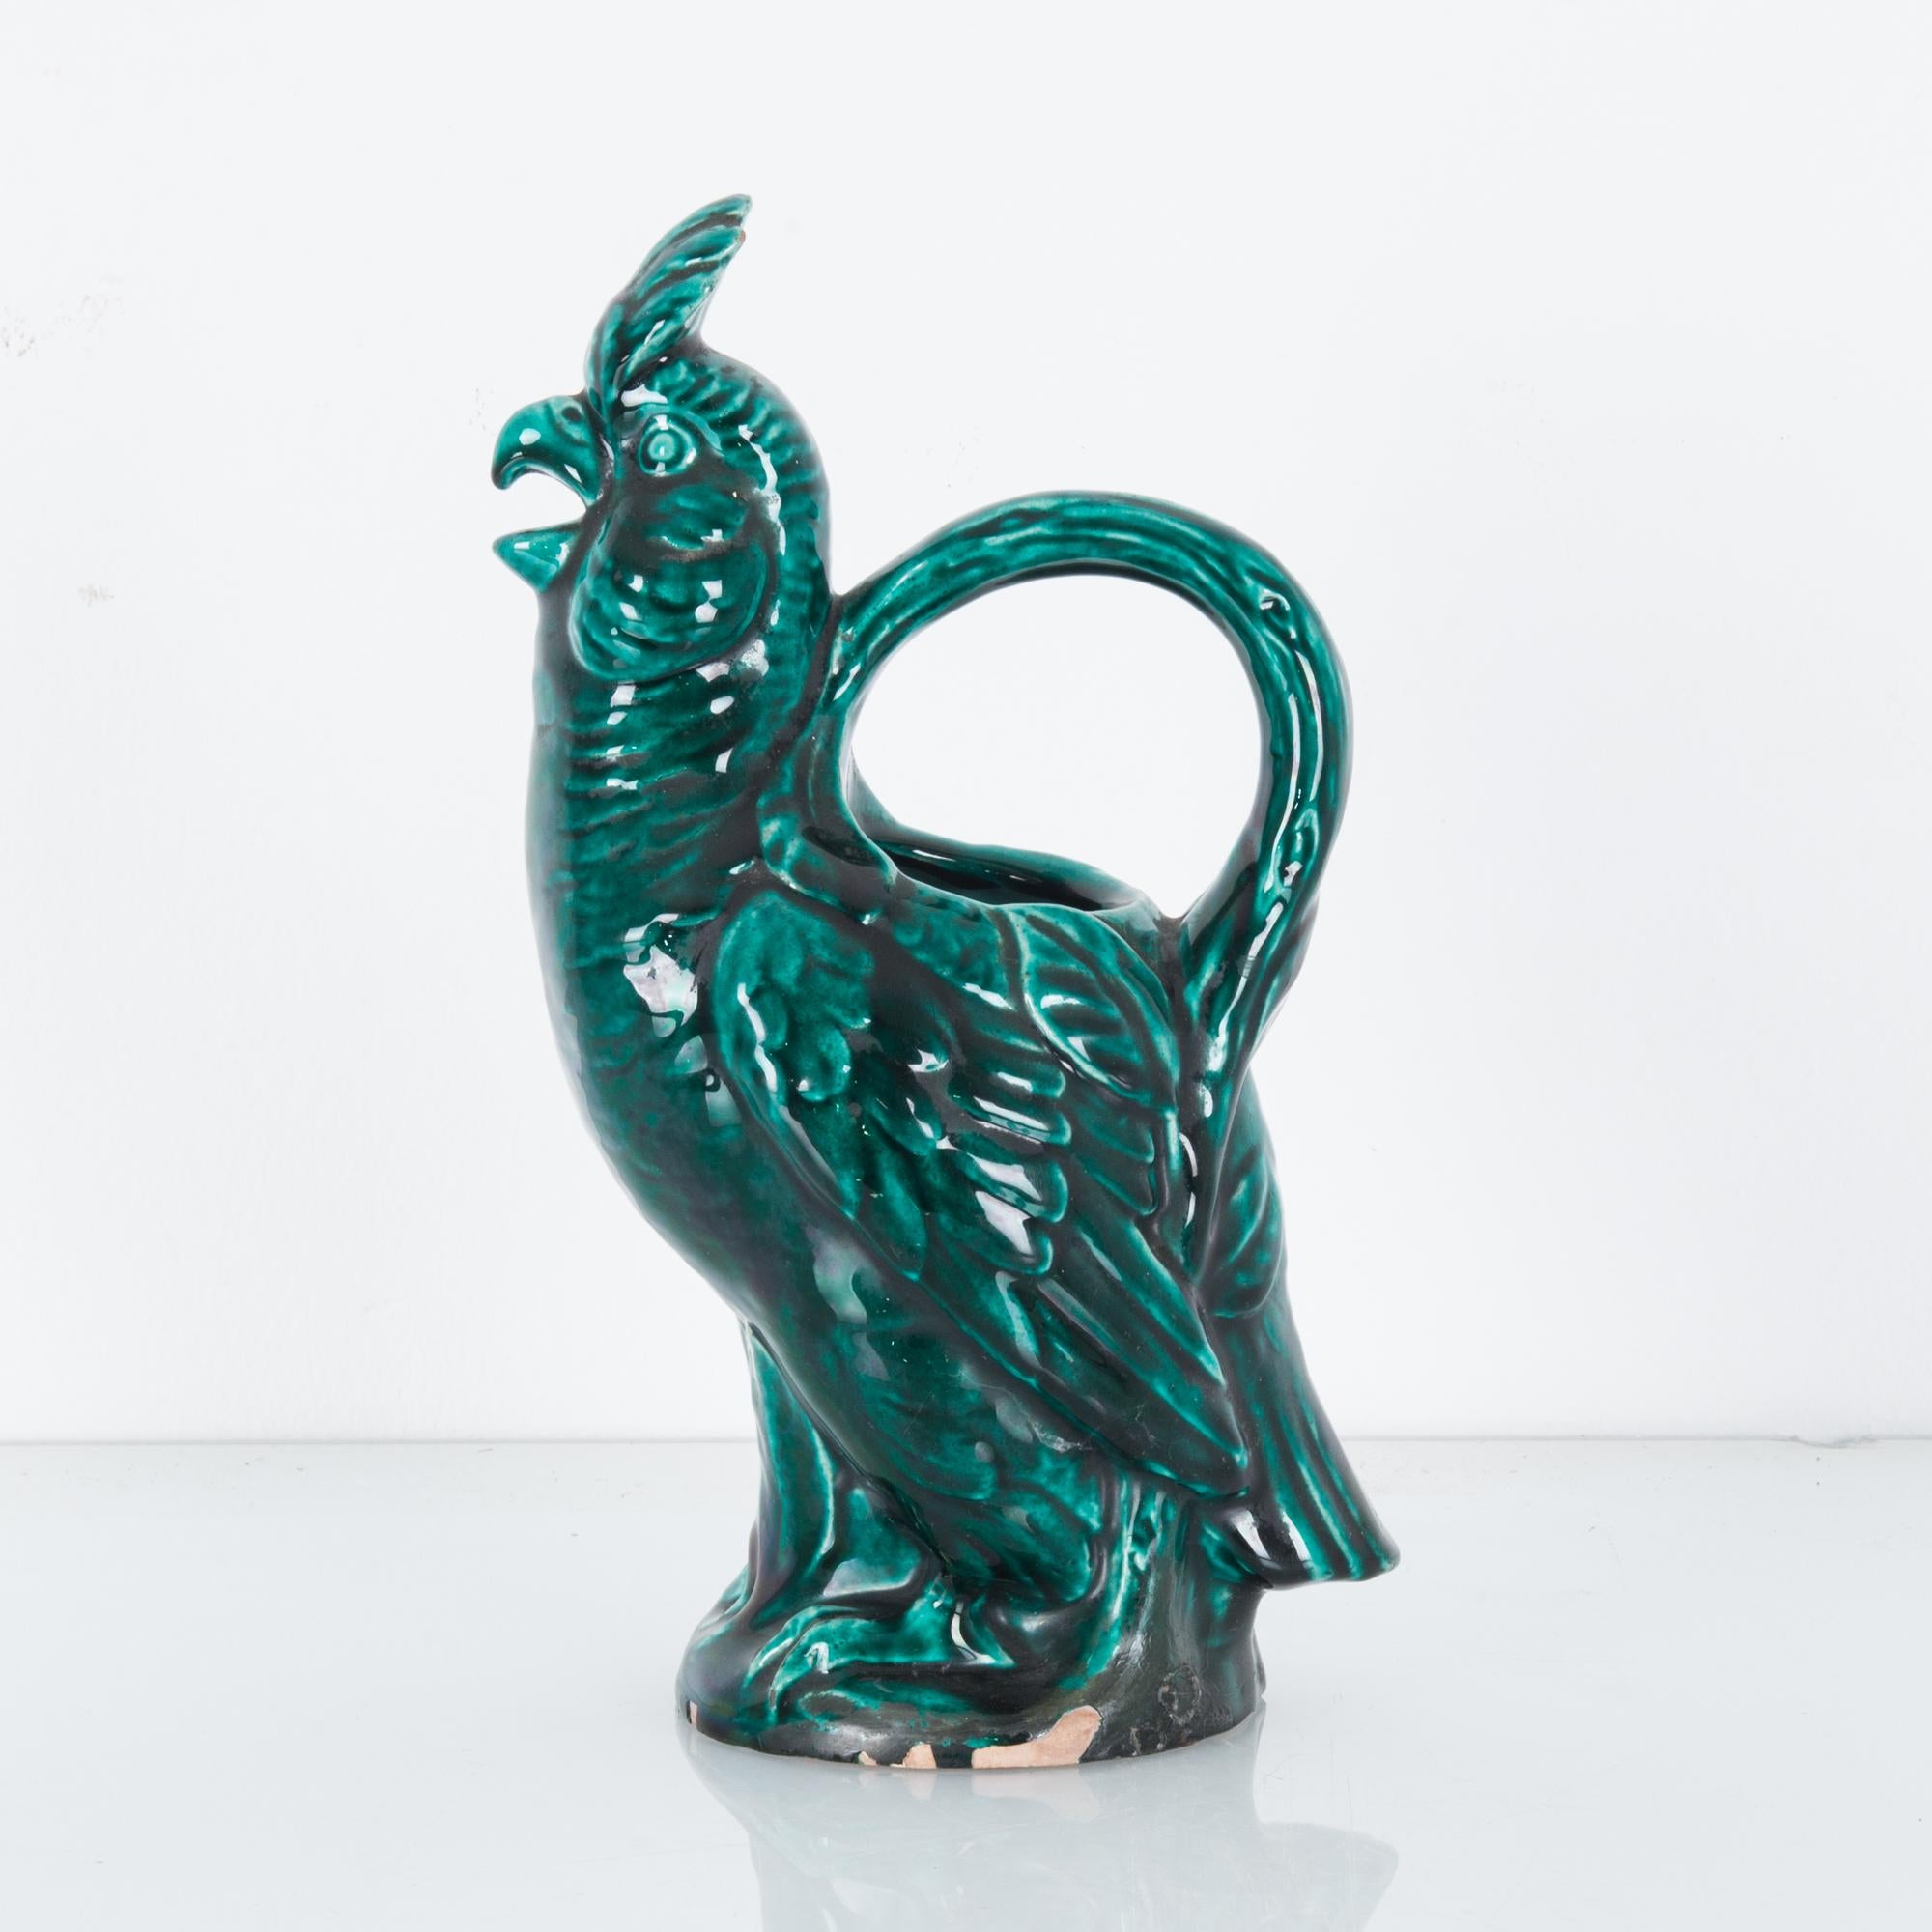 This ceramic jug in the shape of a rooster was made in Italy, circa 1960. It has a carrying handle above its body and a beak spout. The rooster’s feathers and details are well rendered. With its glossy myrtle green glaze, the jug will be a charming